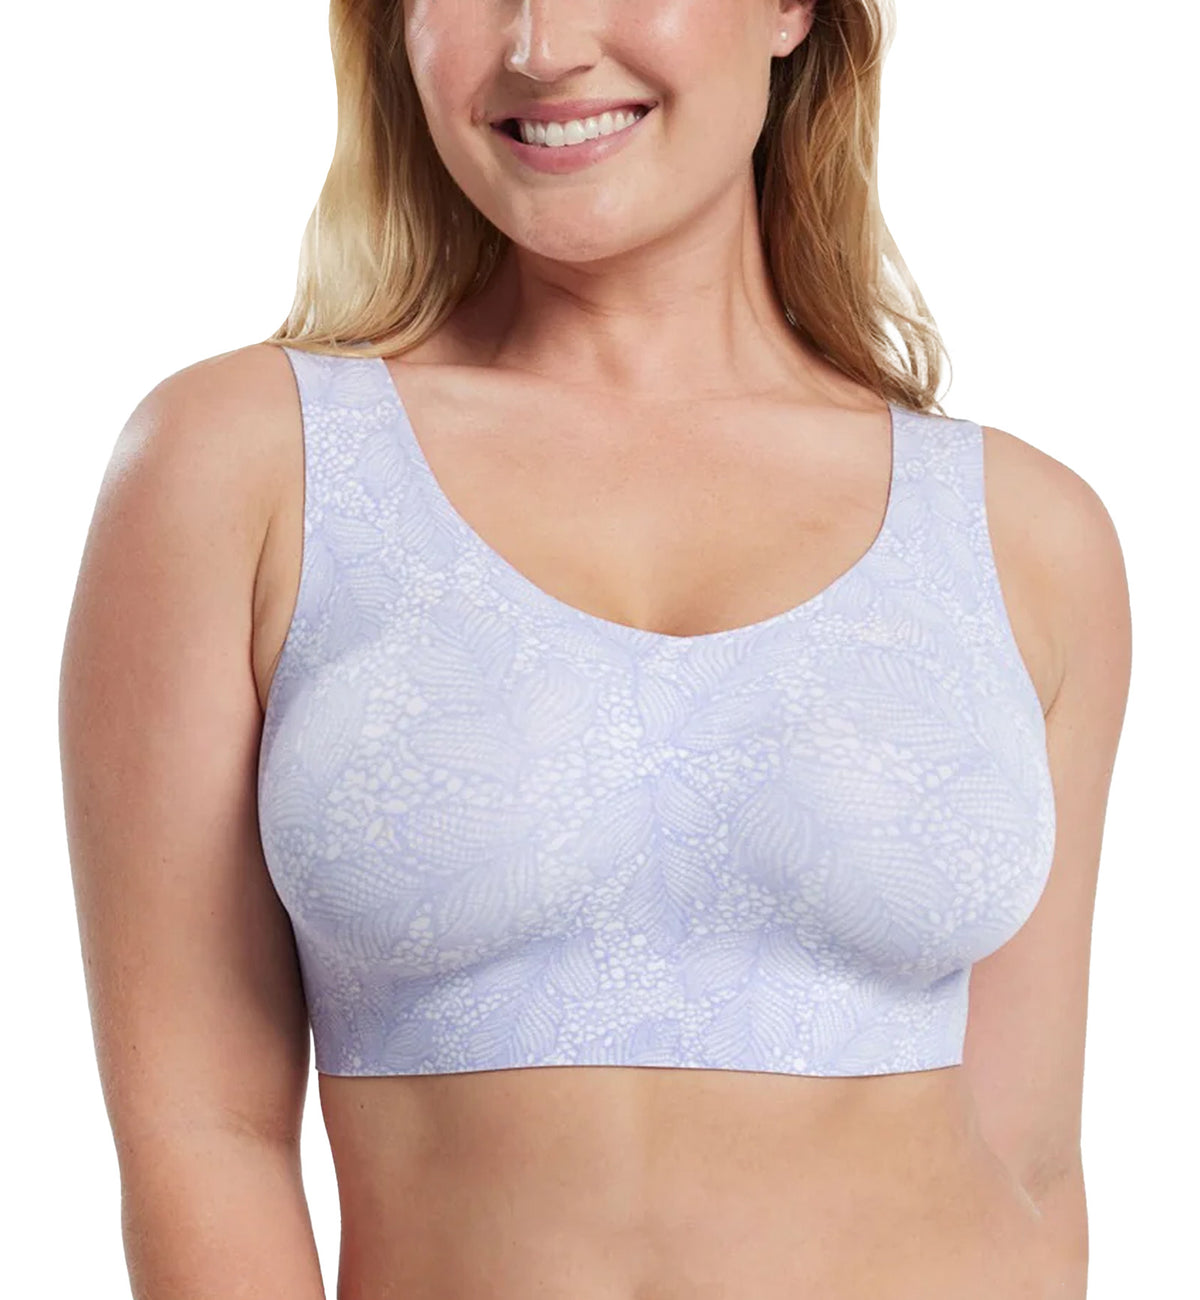 Evelyn &amp; Bobbie DEFY V-Neck Bralette w/ Removable Pads (1728﻿),Small,Moonstone Lace - Moonstone Lace,Small